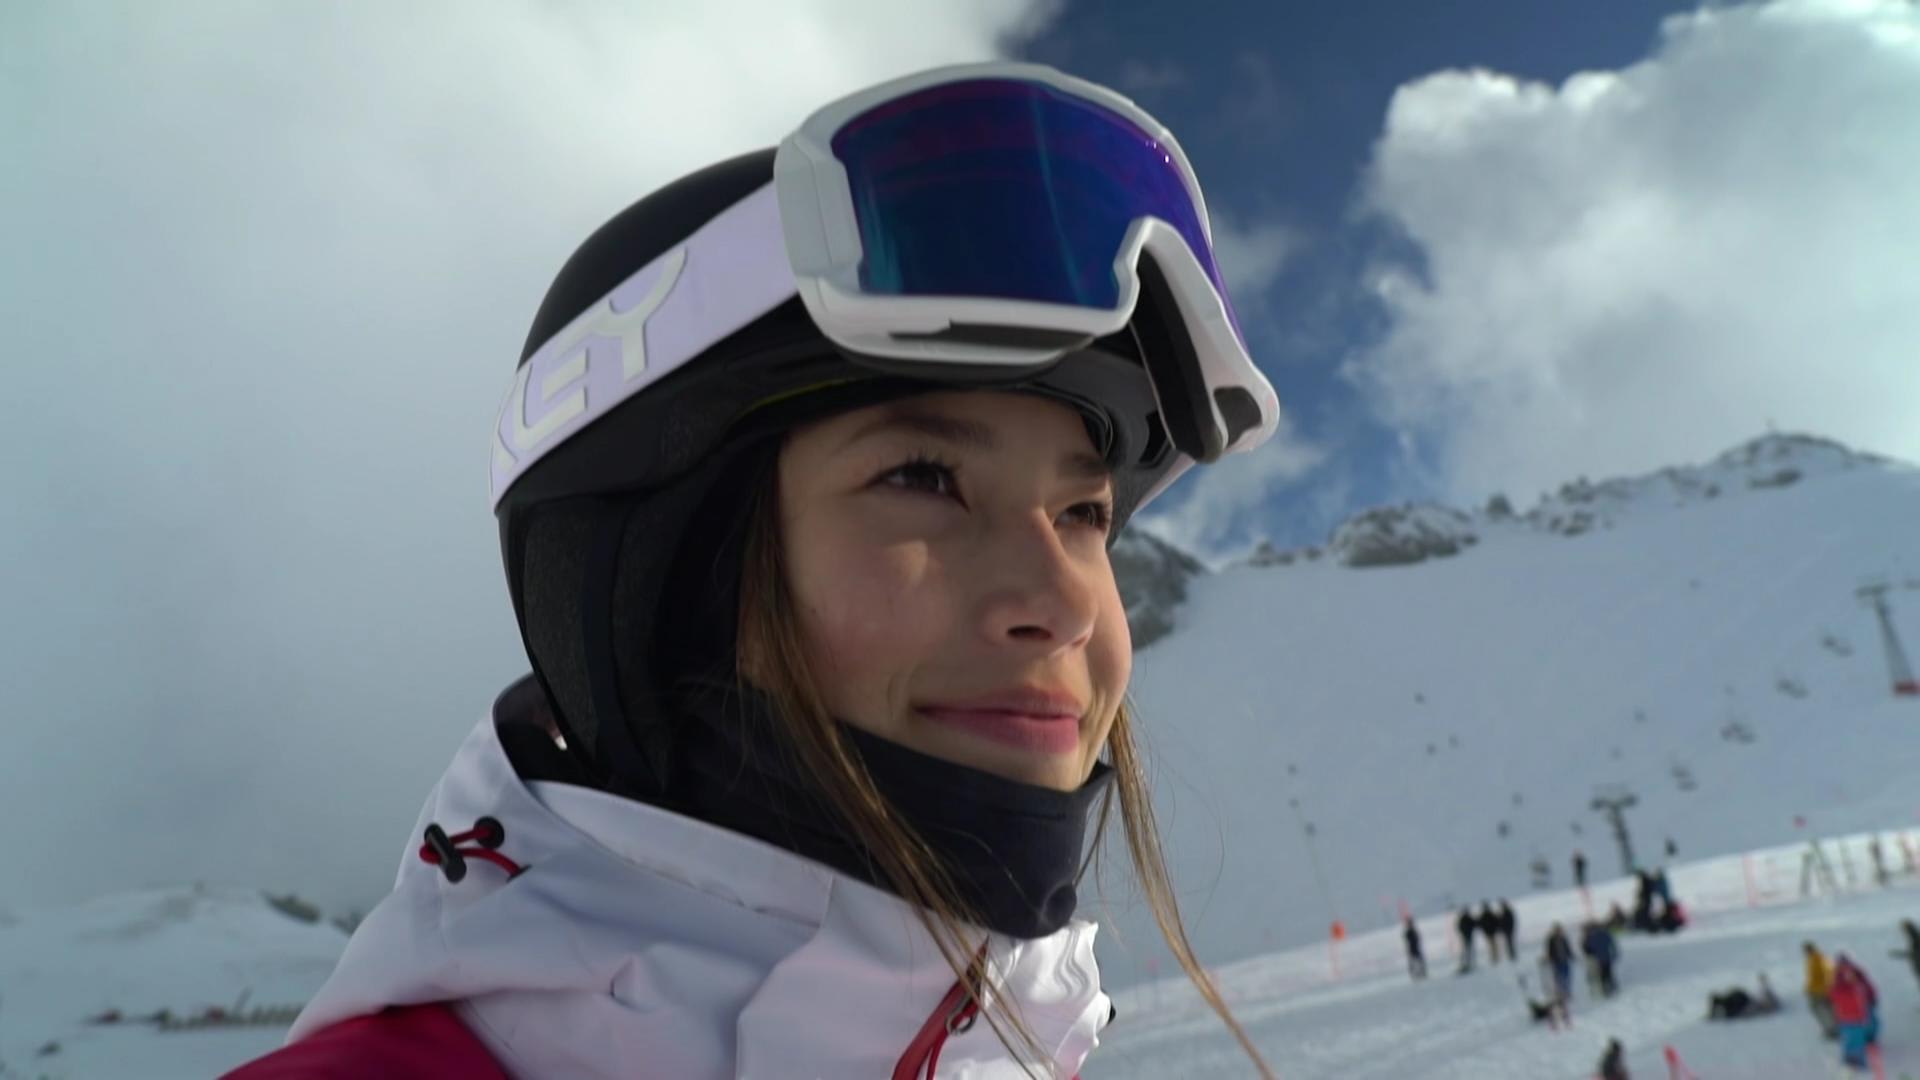 Eileen Gu: The 17 Year Old Skiing Prodigy